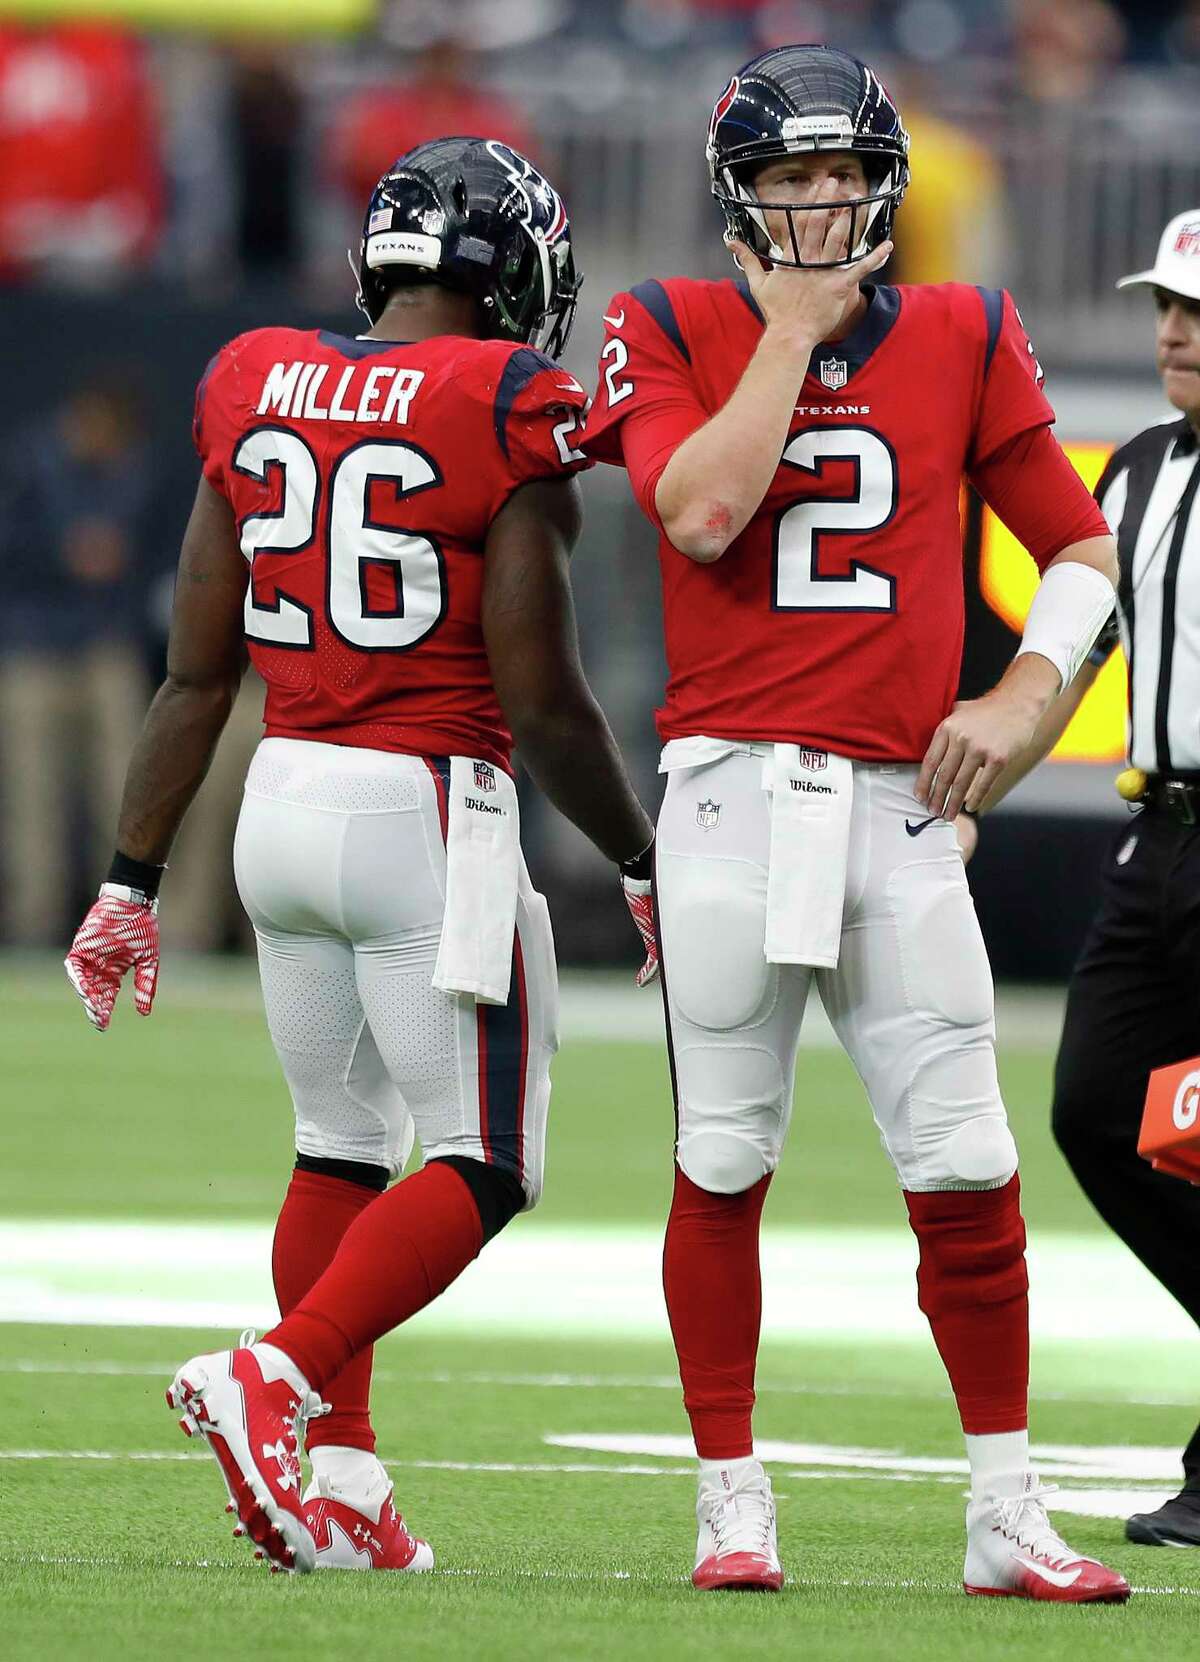 JOHN McCLAIN GRADES THE TEXANS AFTER LOSS TO 49ERS Quarterback A concussion sidelined Tom Savage. T.J. Yates engineered two 75-yard touchdown drives that ended with scoring passes to DeAndre Hopkins. They failed to score on their last five possessions. Grade: C